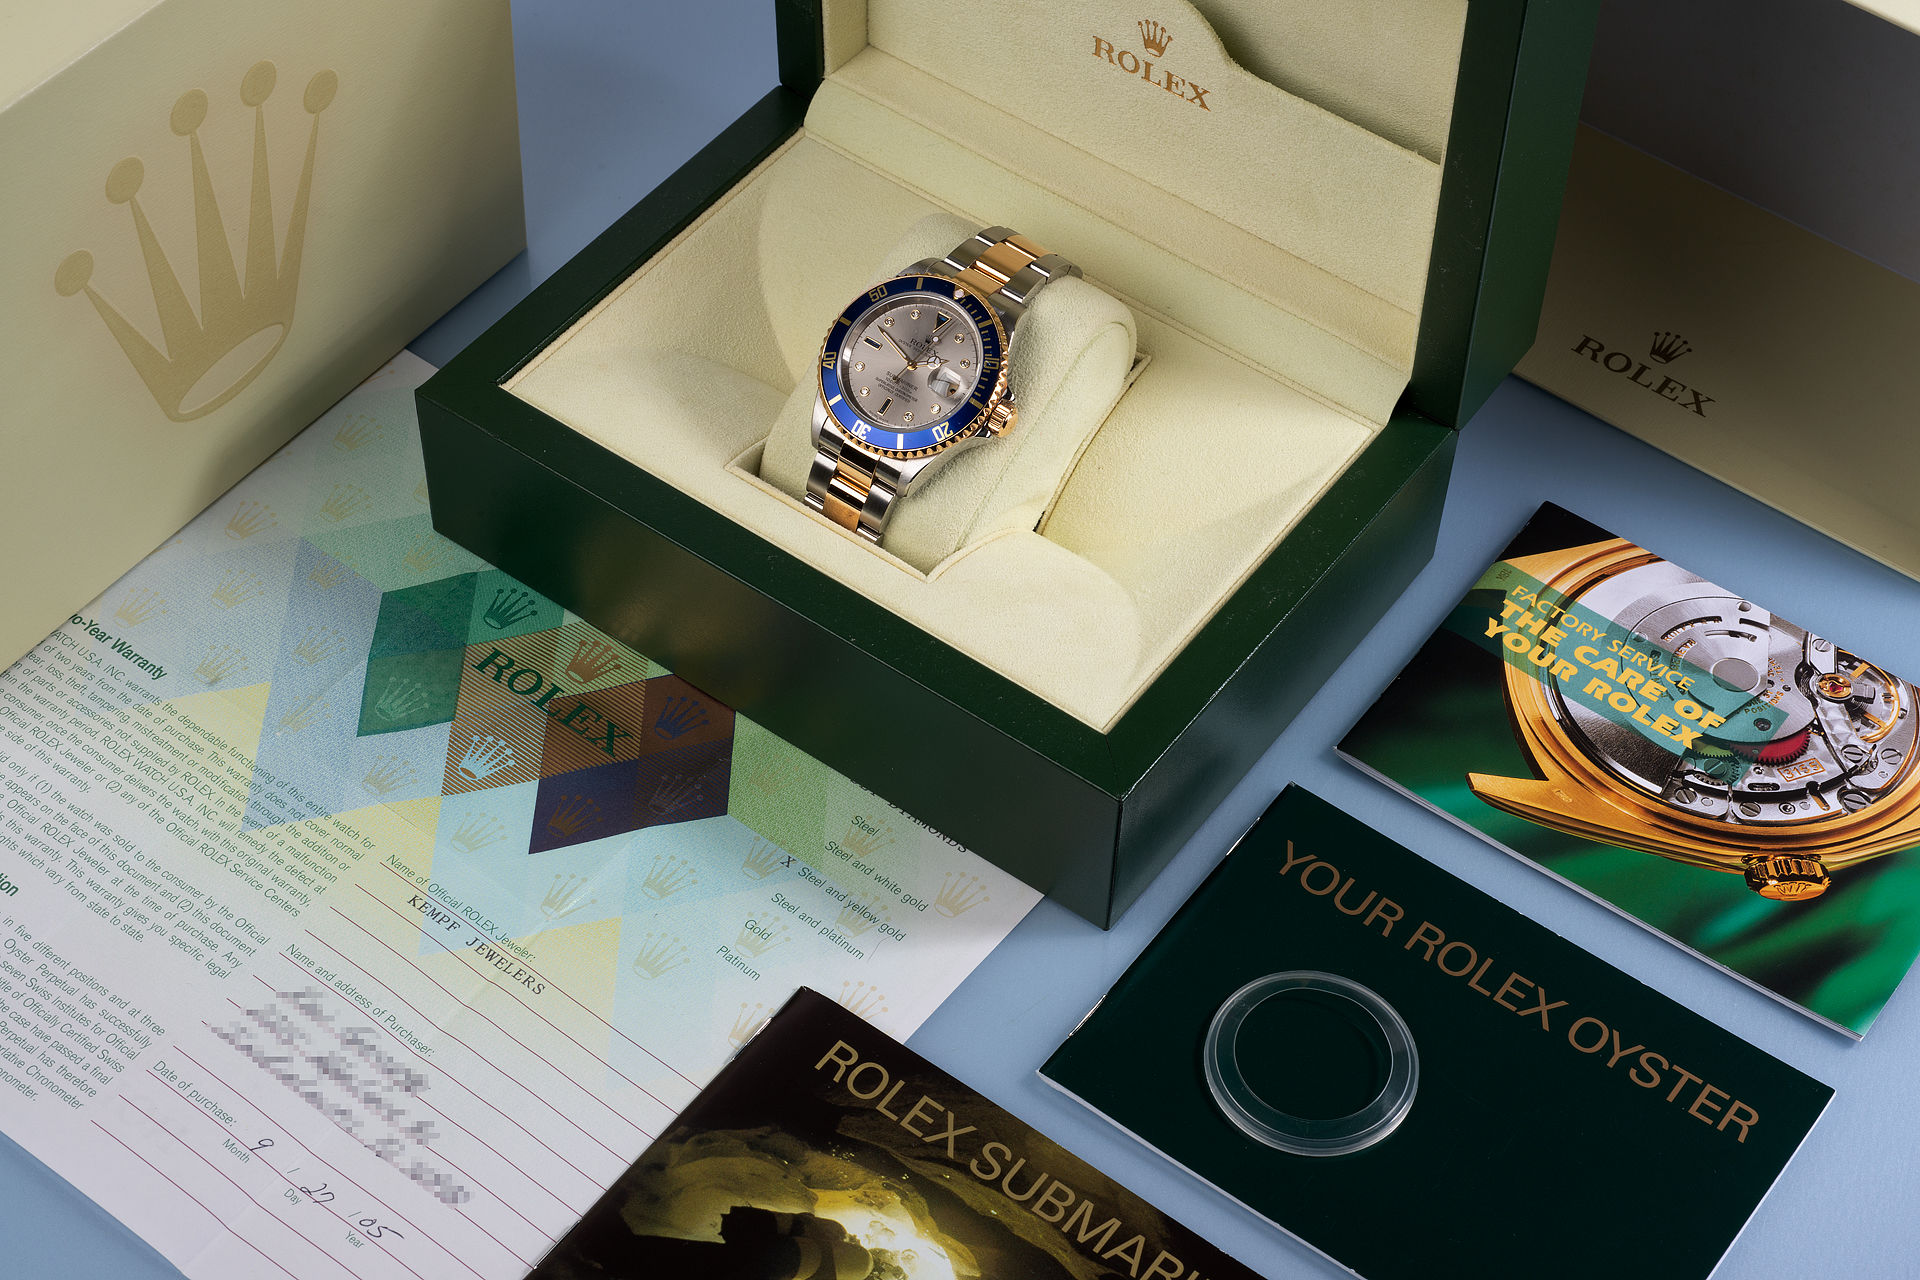 ref 16613 | 'Box & Papers' Gold & Steel | Rolex Submariner Date